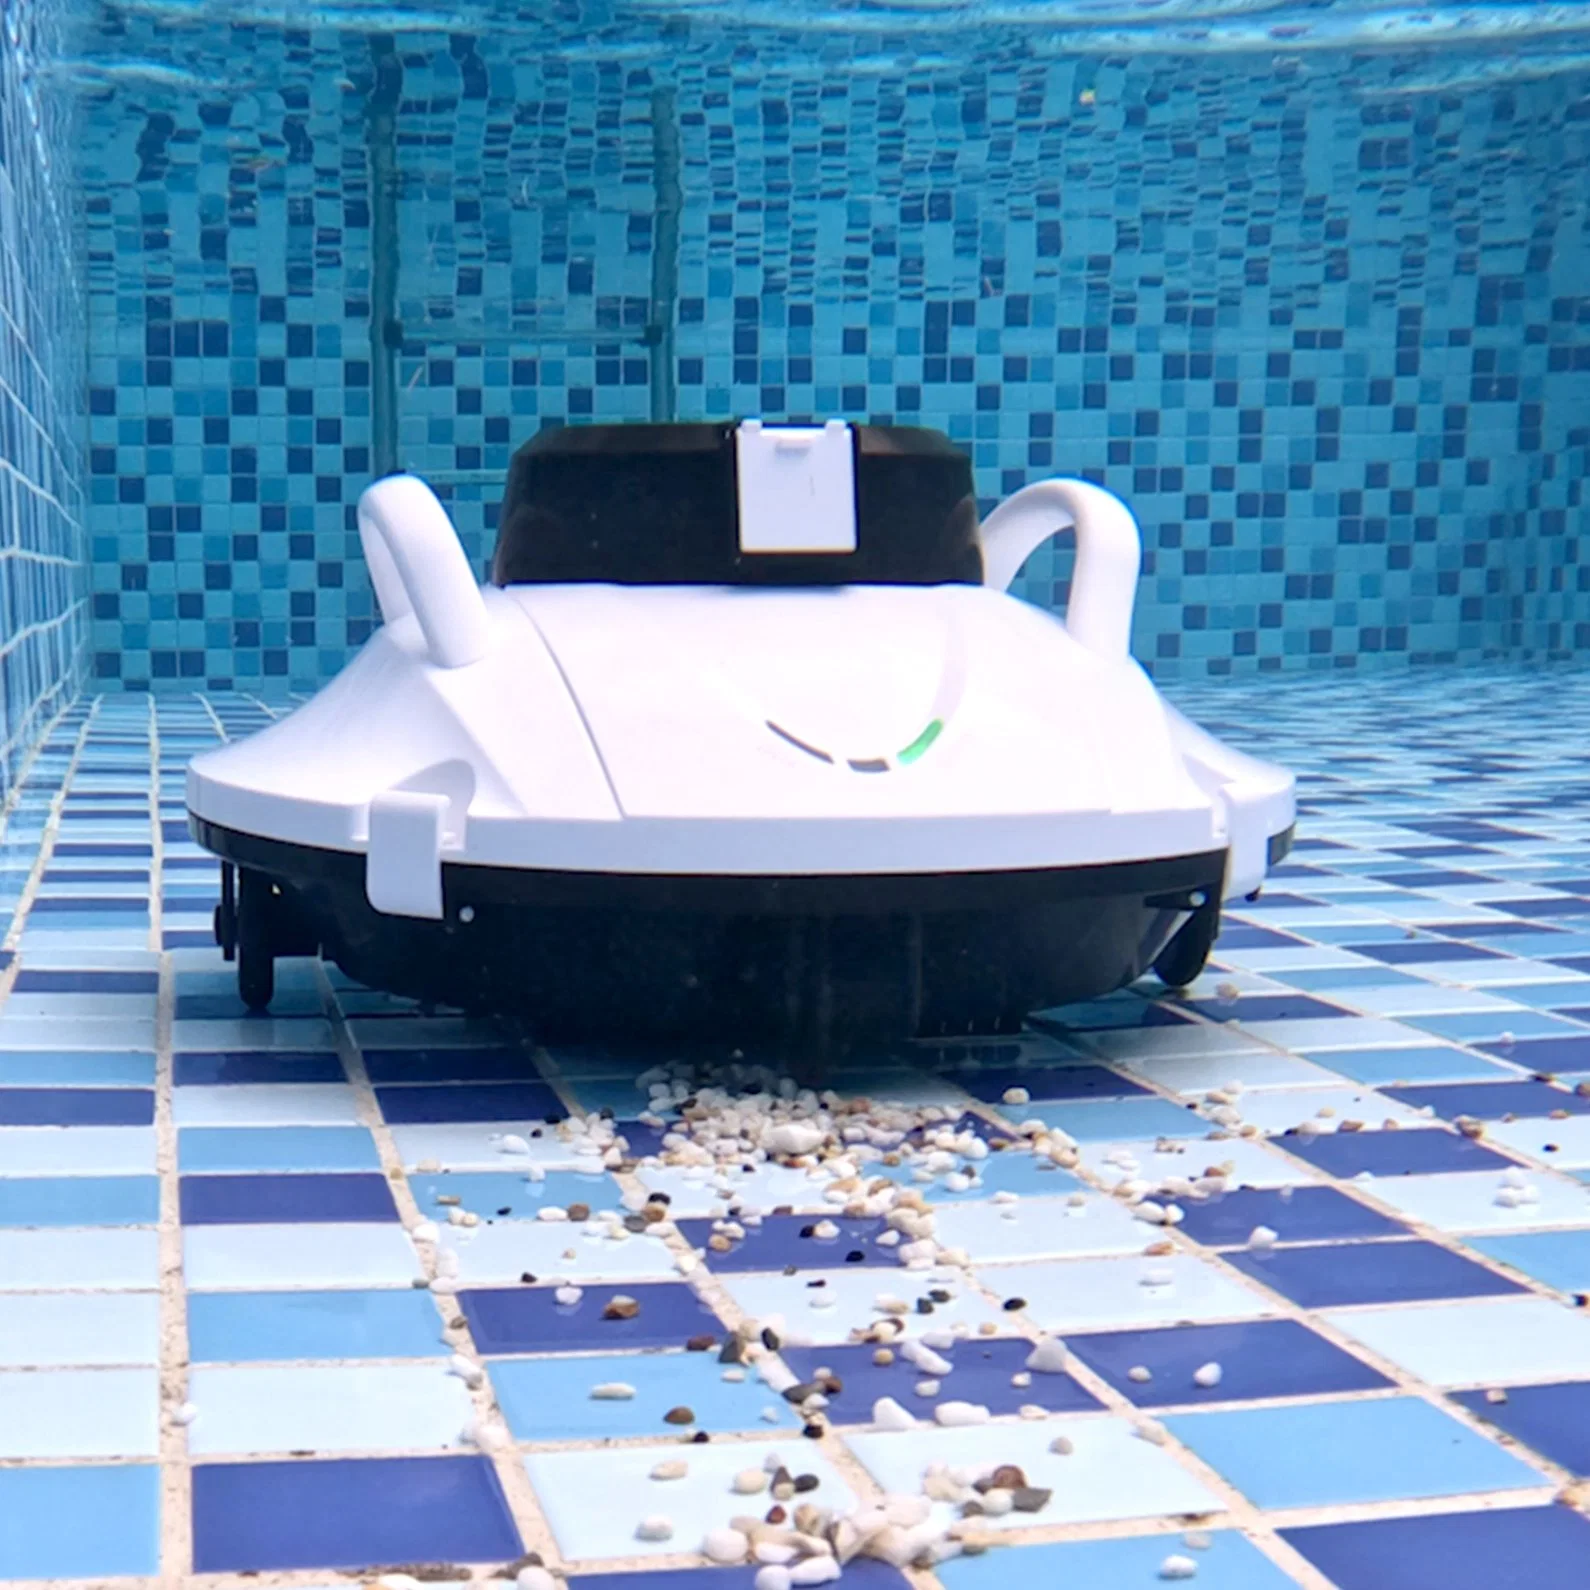 Manufacturer Underwater Cordless Robotic Automatic Swimming Pool Cleaner Cleaning Equipment Tool Water Games Jet Skis Water Clean Robot Mop Pool Vacuum Cleaner